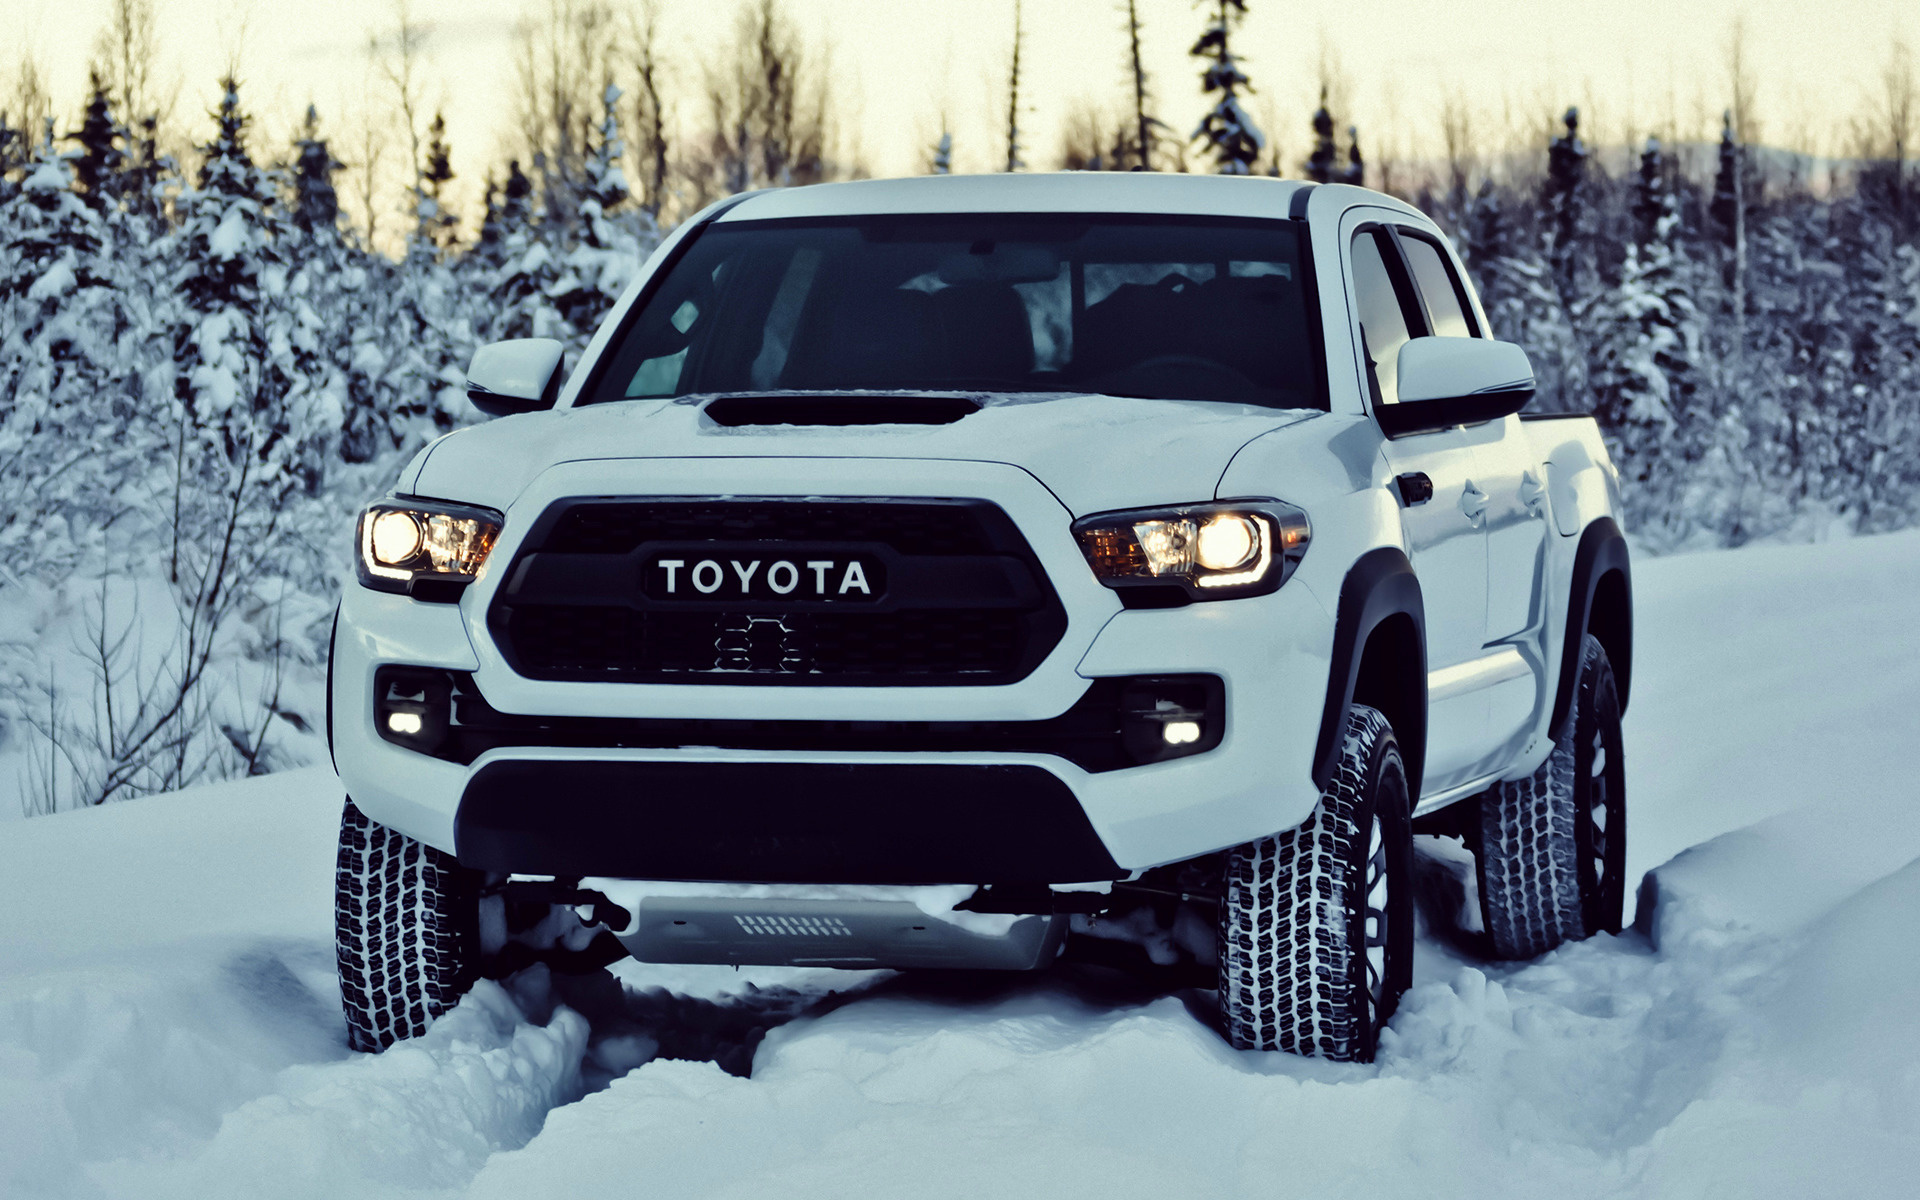 Toyota Tacoma TRD Pro Double Cab 2017 Wallpapers and HD